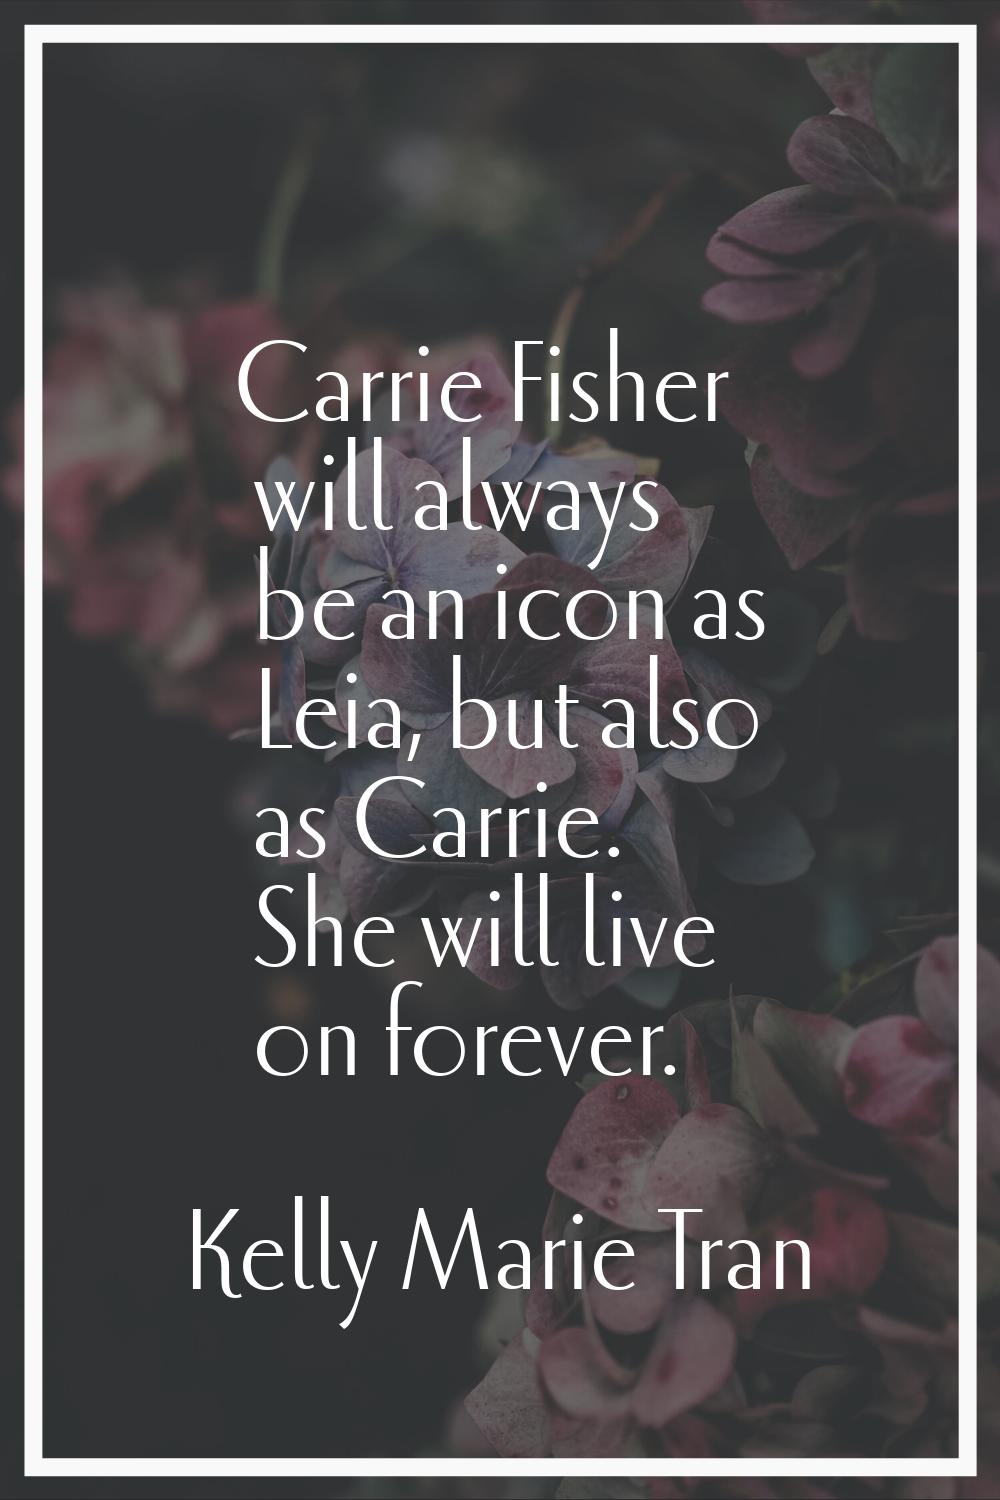 Carrie Fisher will always be an icon as Leia, but also as Carrie. She will live on forever.